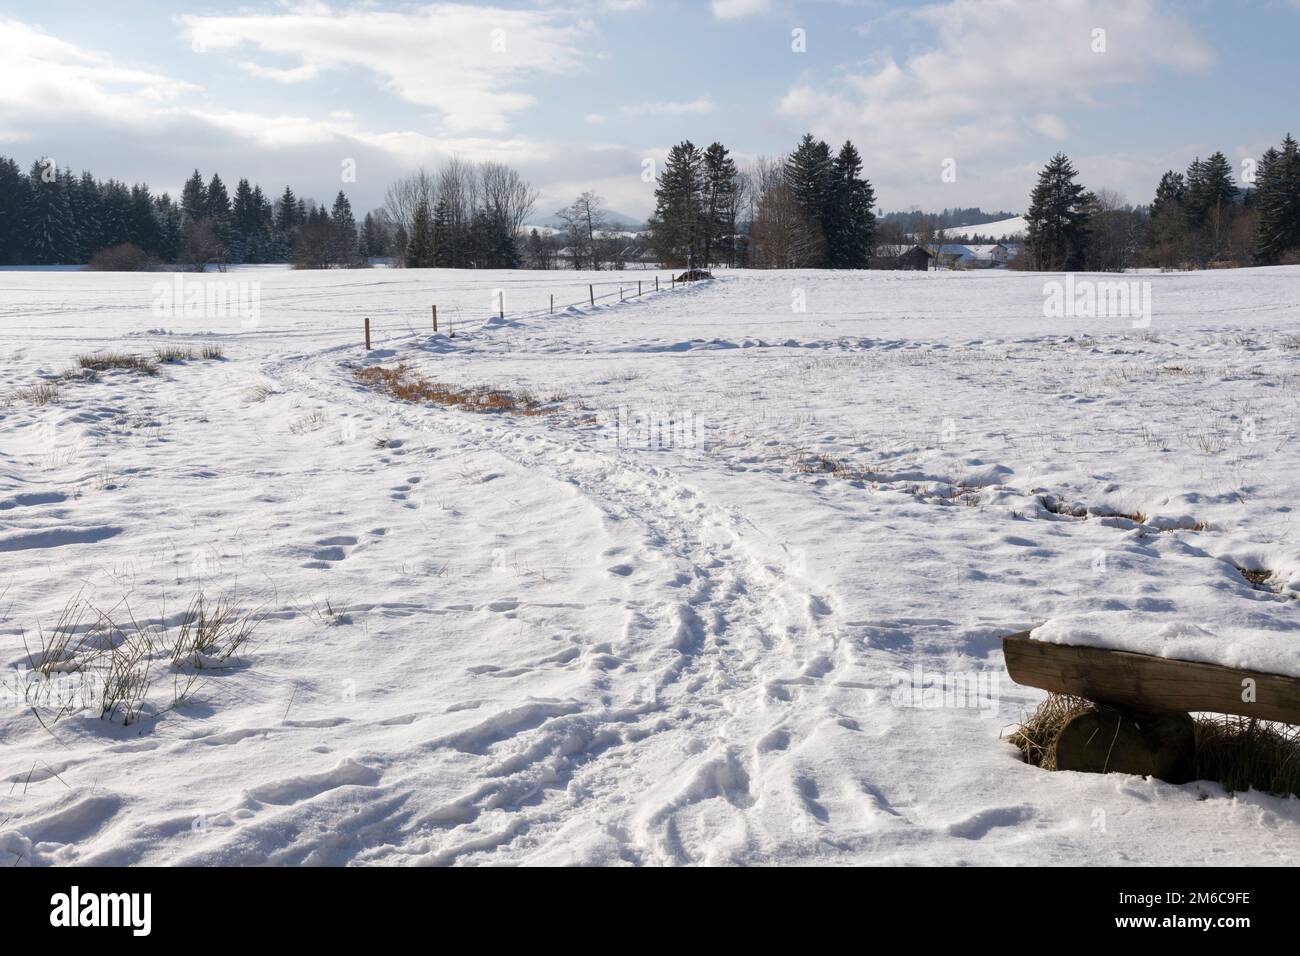 At the entrance to the Premer nature trail, footprints across a snowy field. Prem, Weilheim-Schongau, Upper Bavaria, Bavaria, Germany Stock Photo